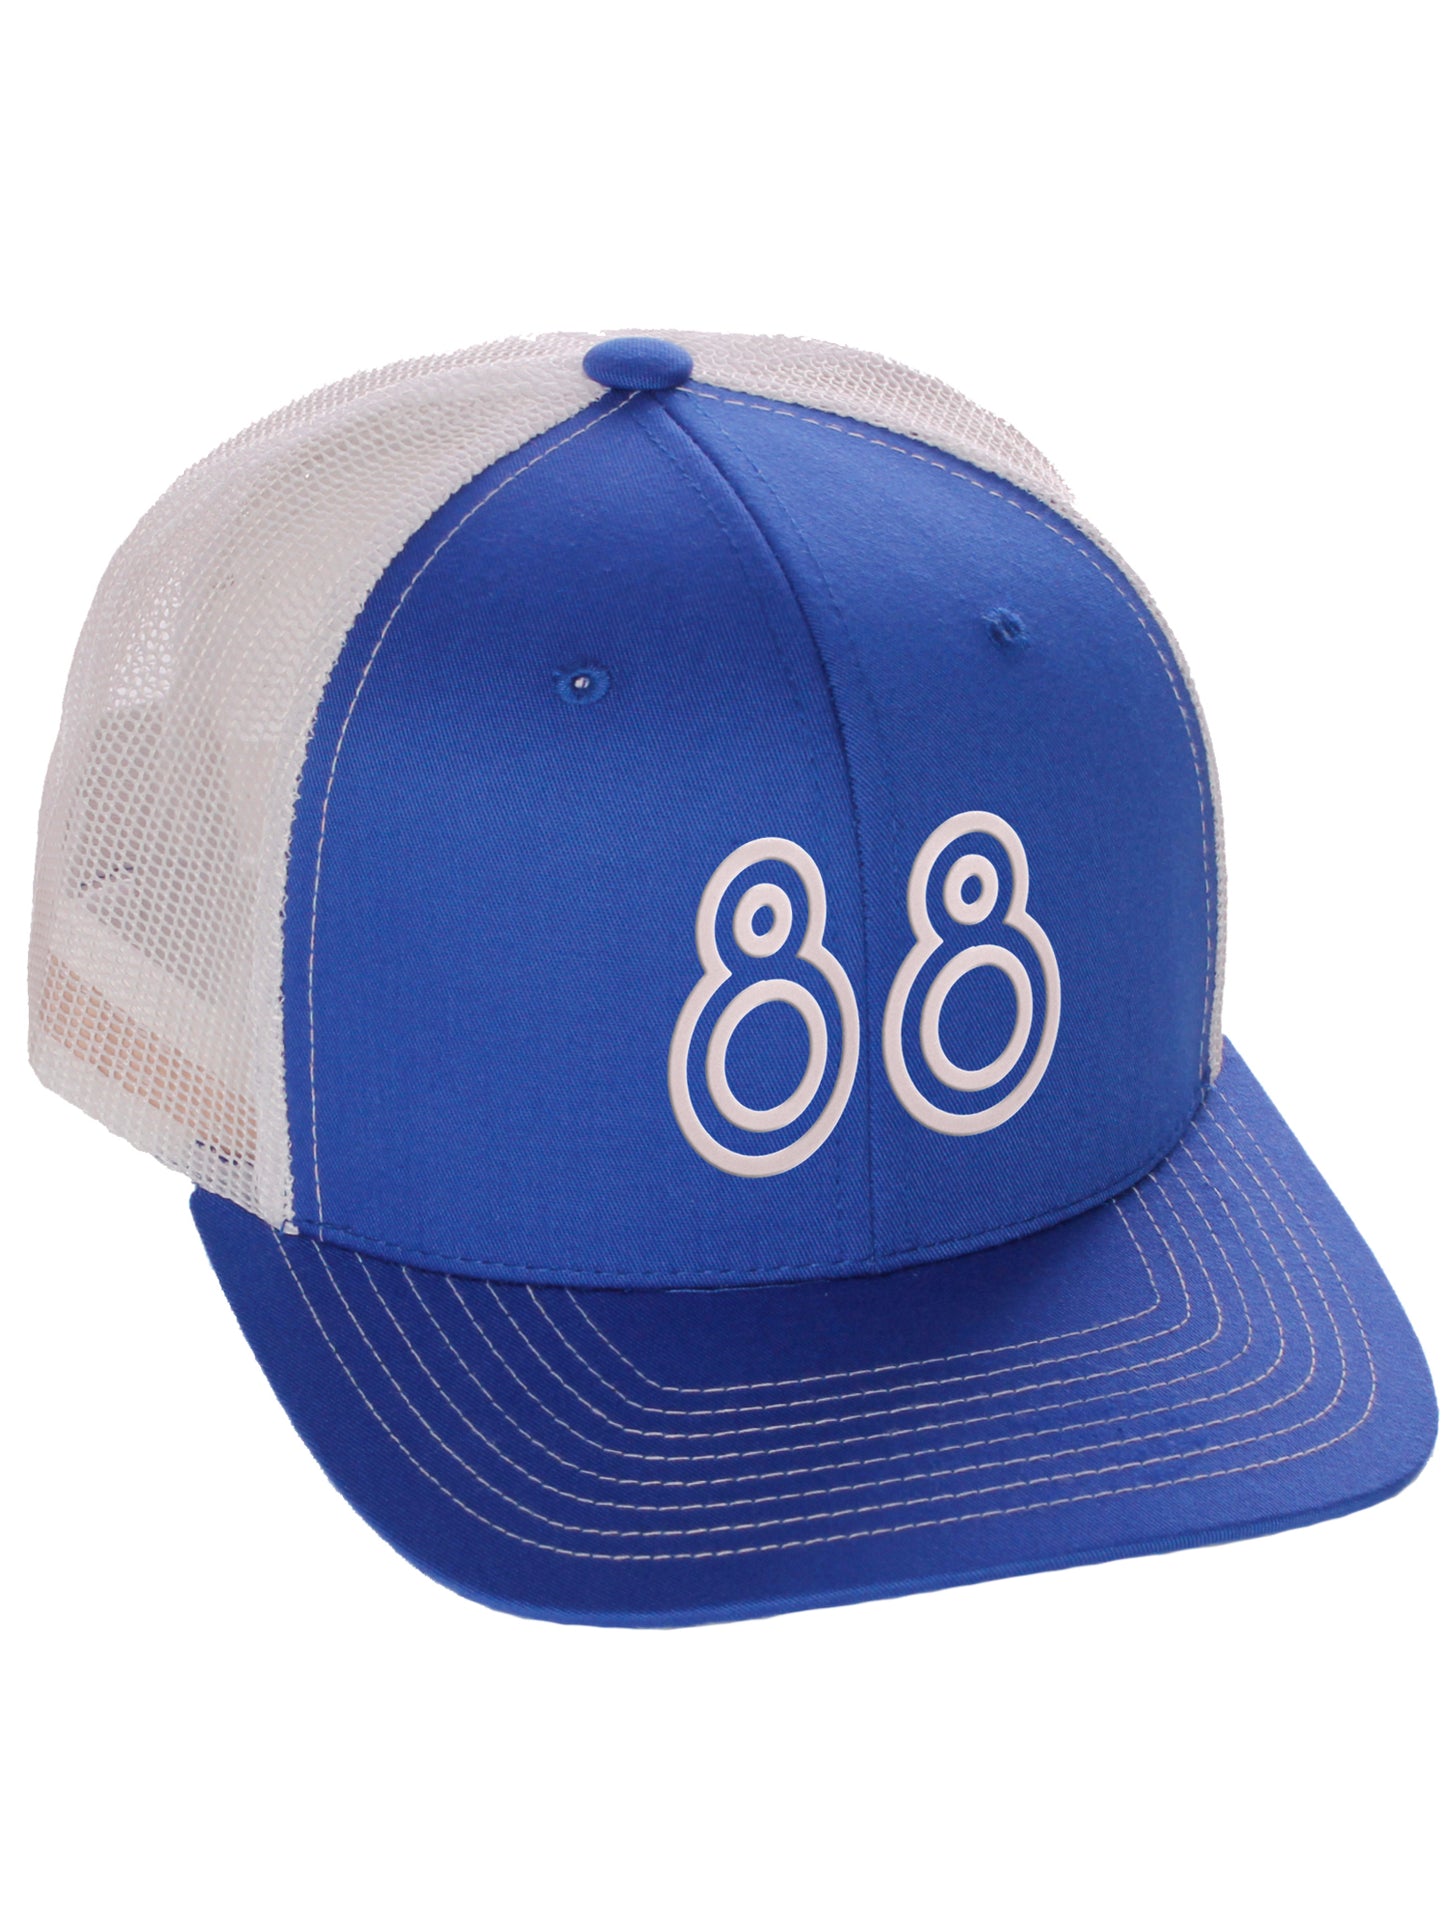 Daxton Team Numbers Structured Trucker Mesh Hat Mid Profile Cap, Royal White